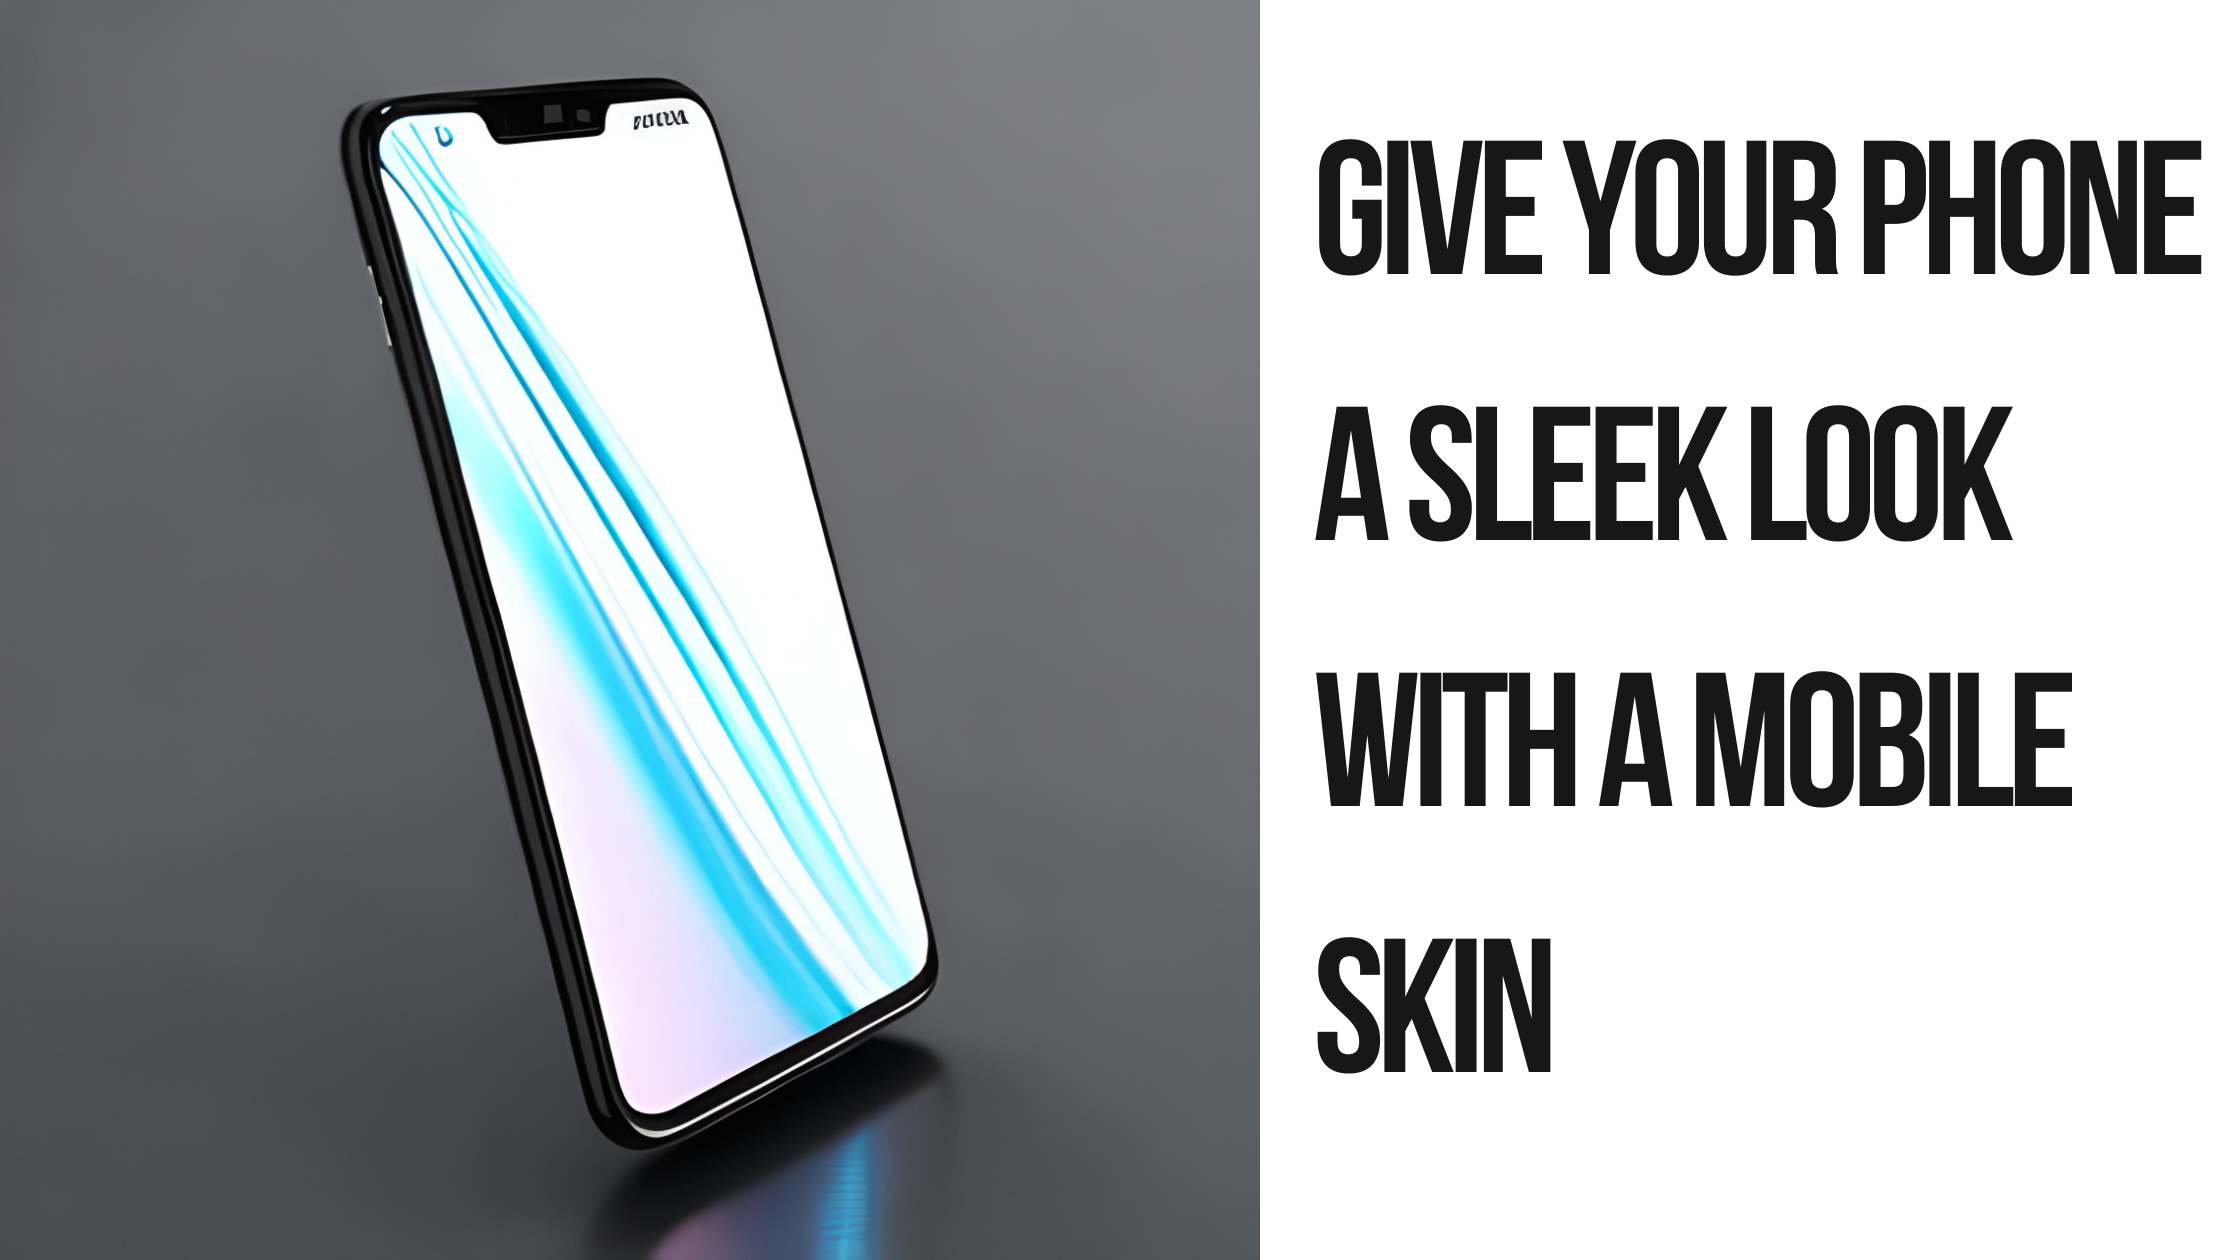 Give Your Phone a Sleek Look With a Mobile Skin